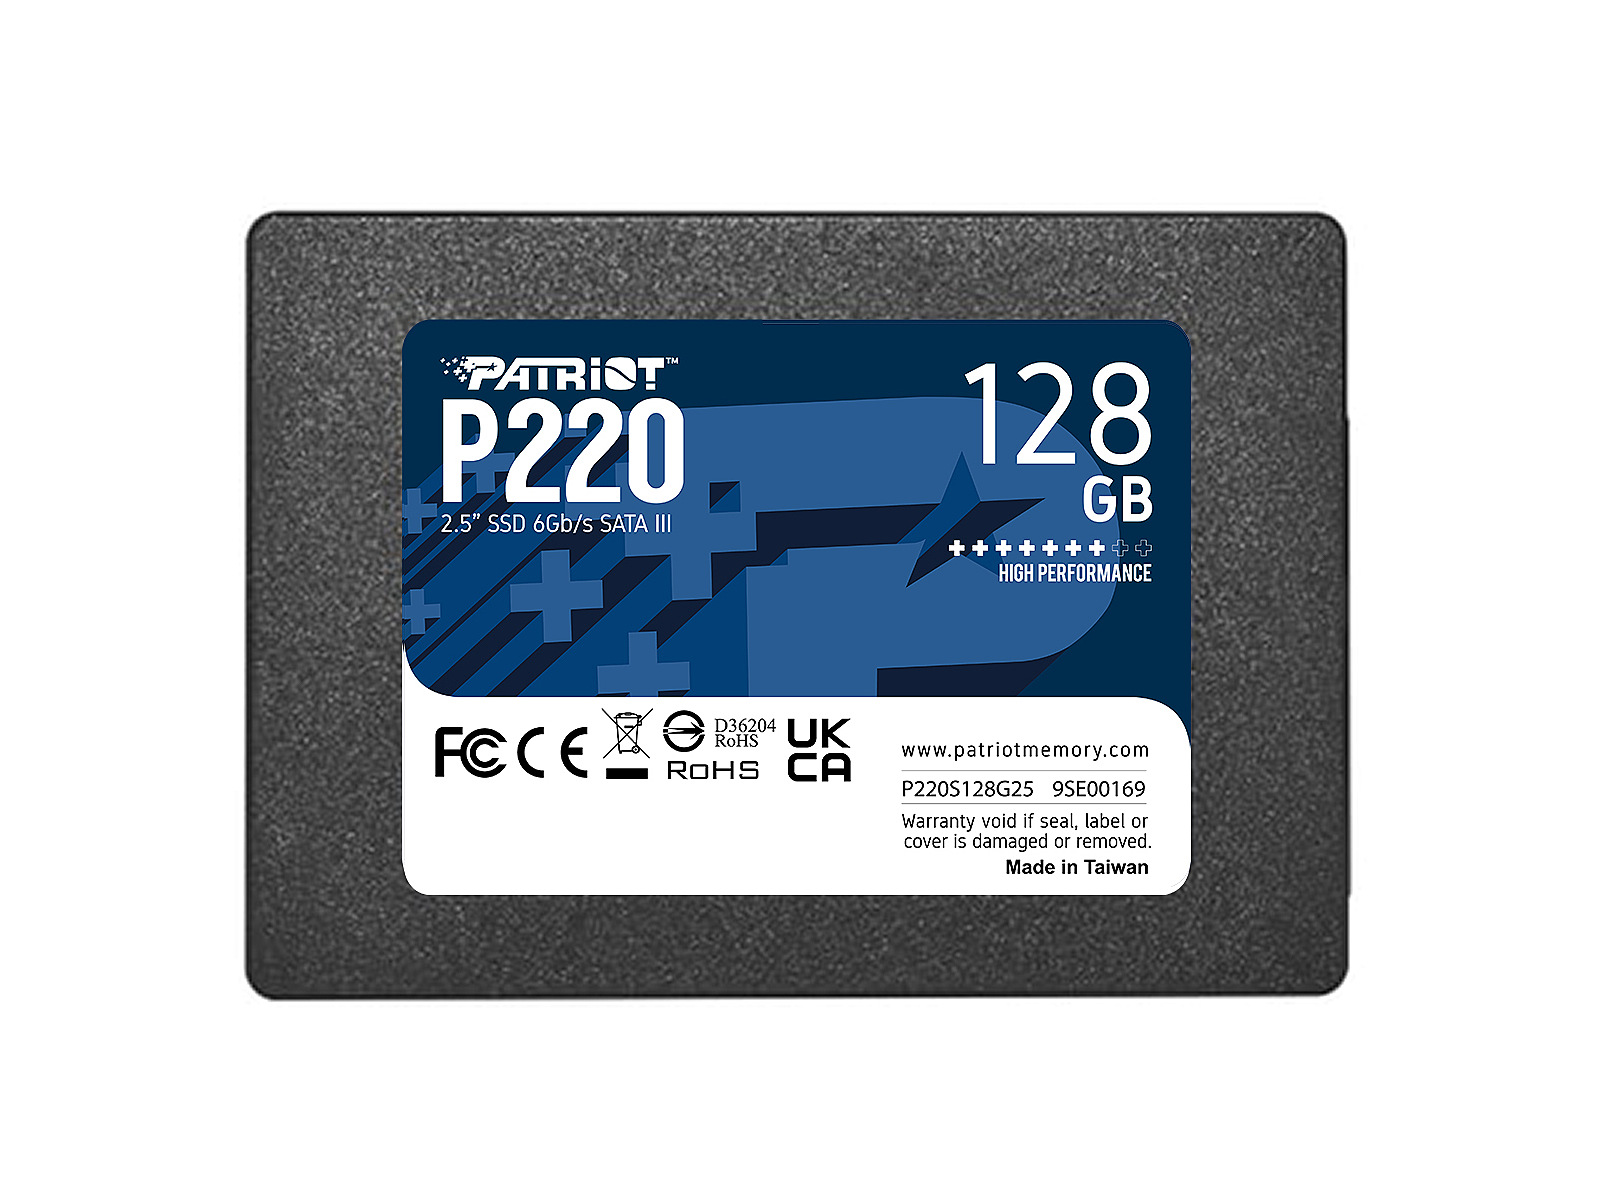 Solid State Drives (SSD)